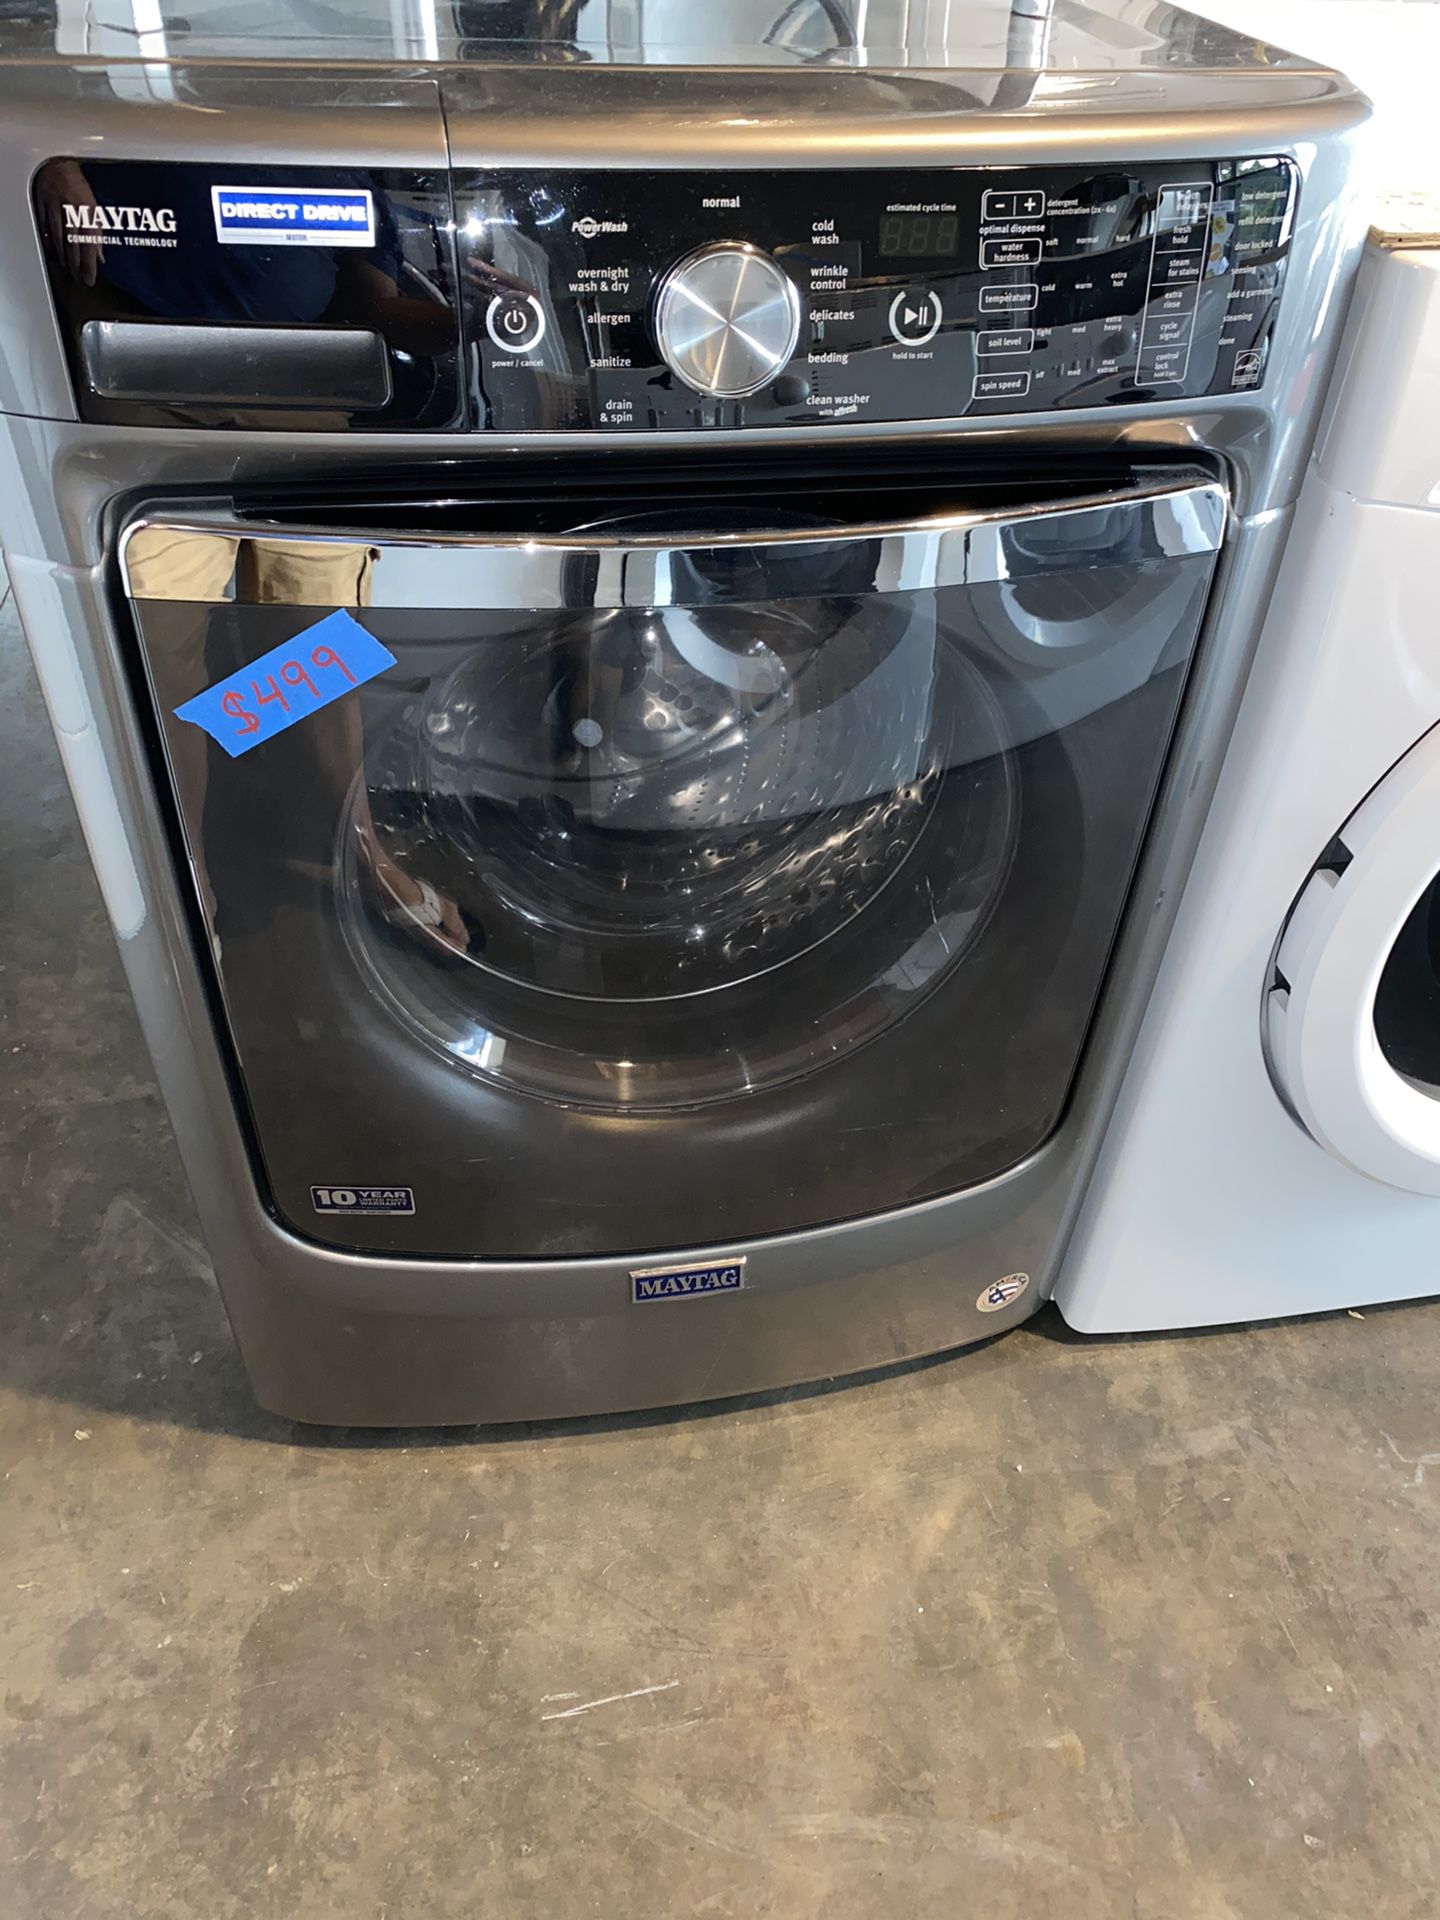 MAYTAG XL CAPACITY FRONT LOADING WASHER STEAM